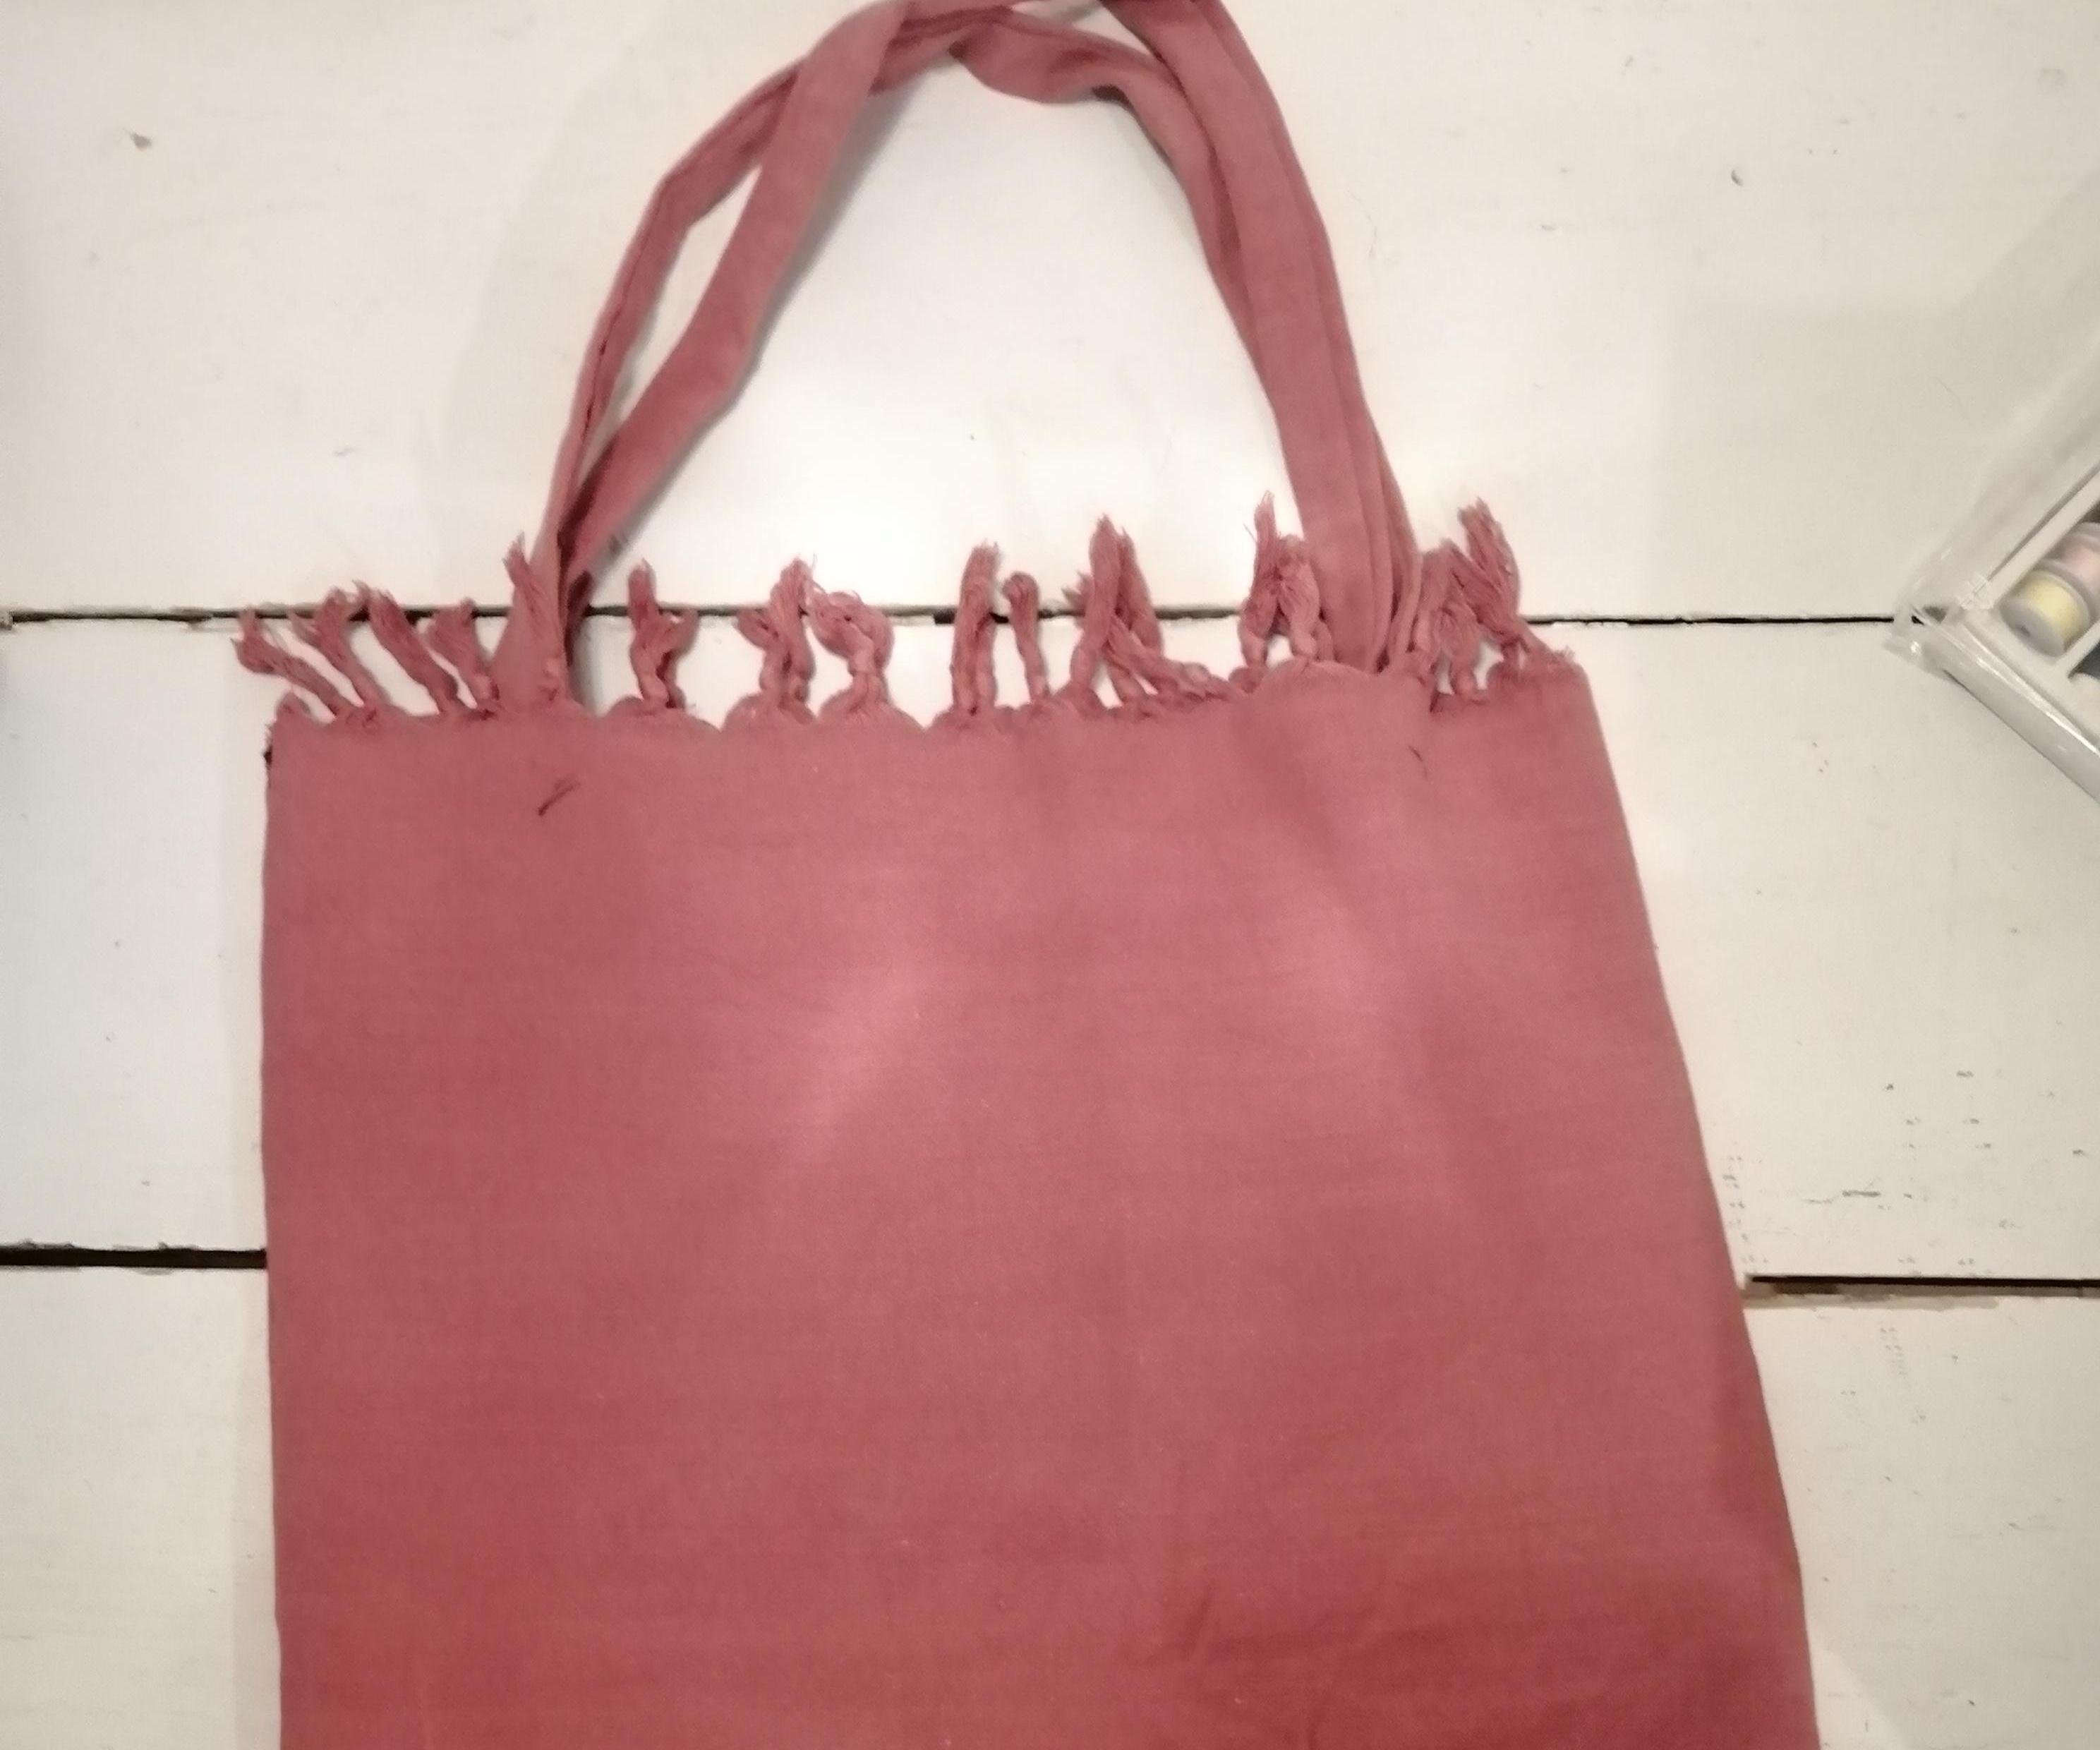 How to Sew a Tote Bag (easy Tutorial)!